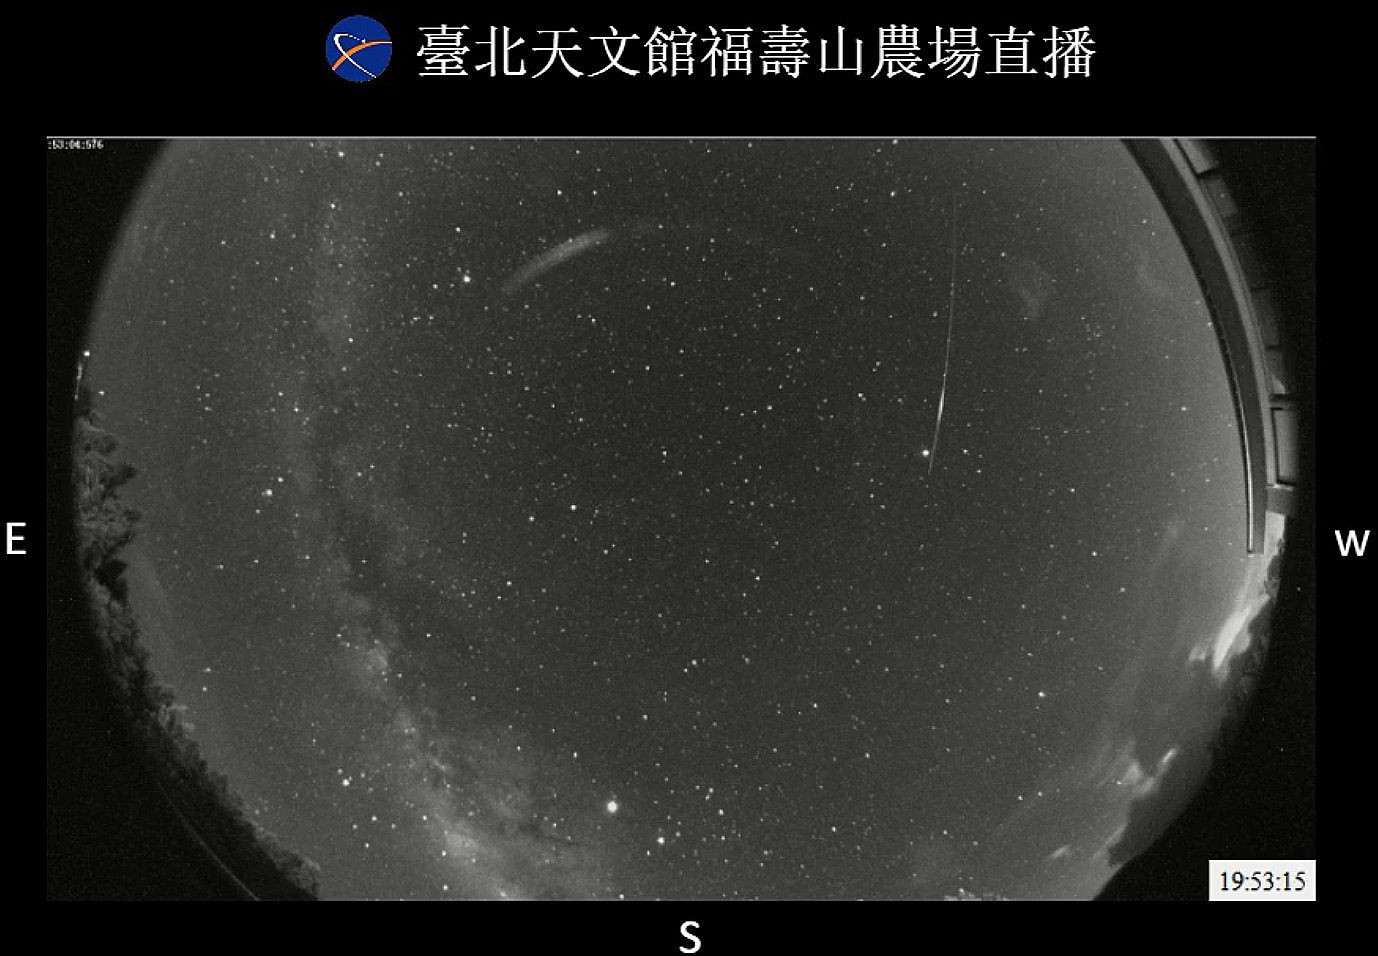 It is estimated that Orionids appear on 22nd, October. Attribute: Taipei City Government